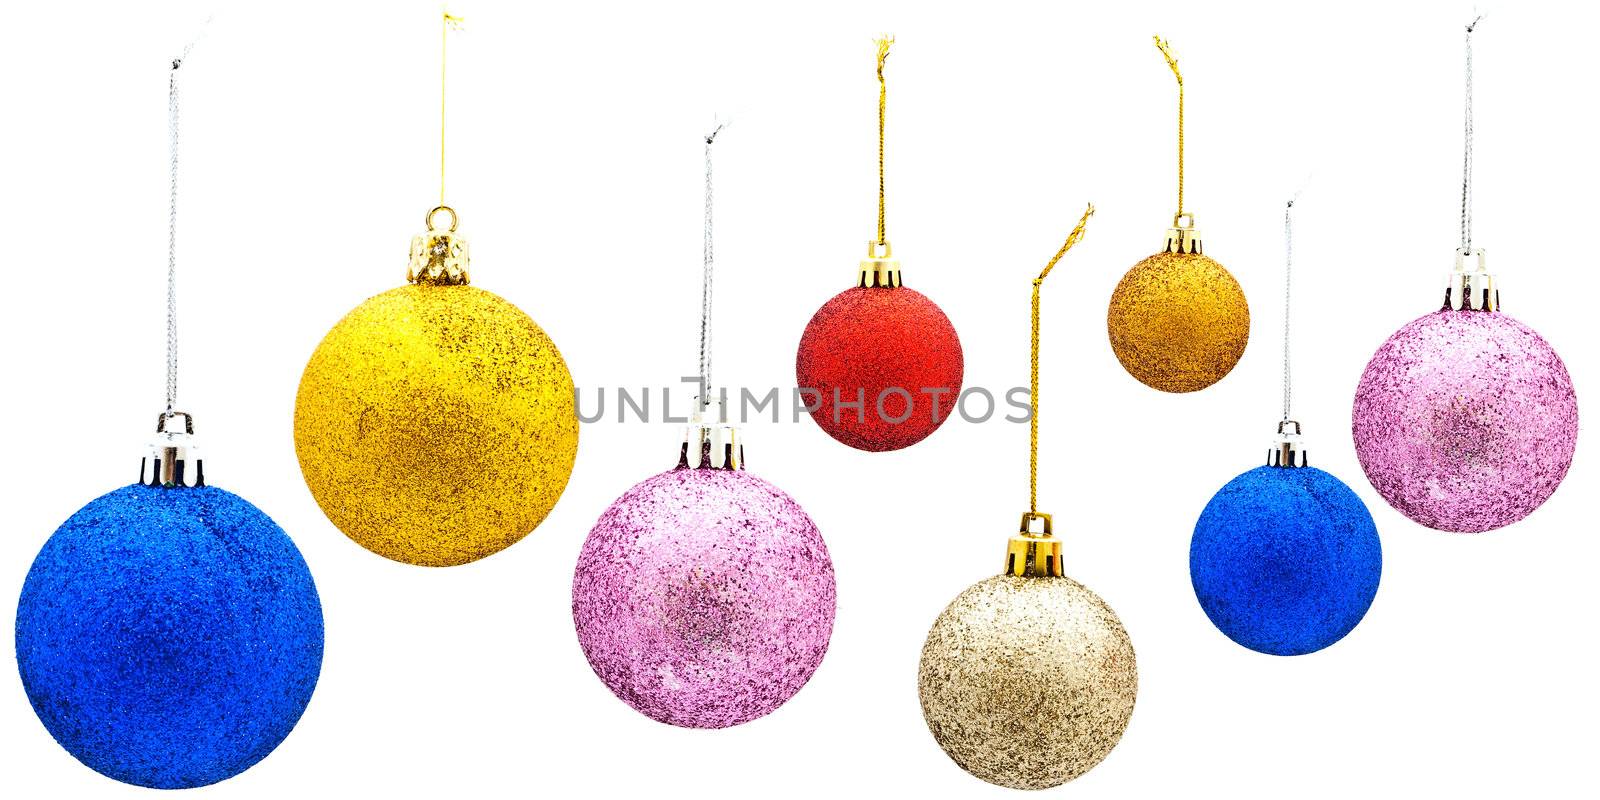 Bright multicolored New Year toys against the white background